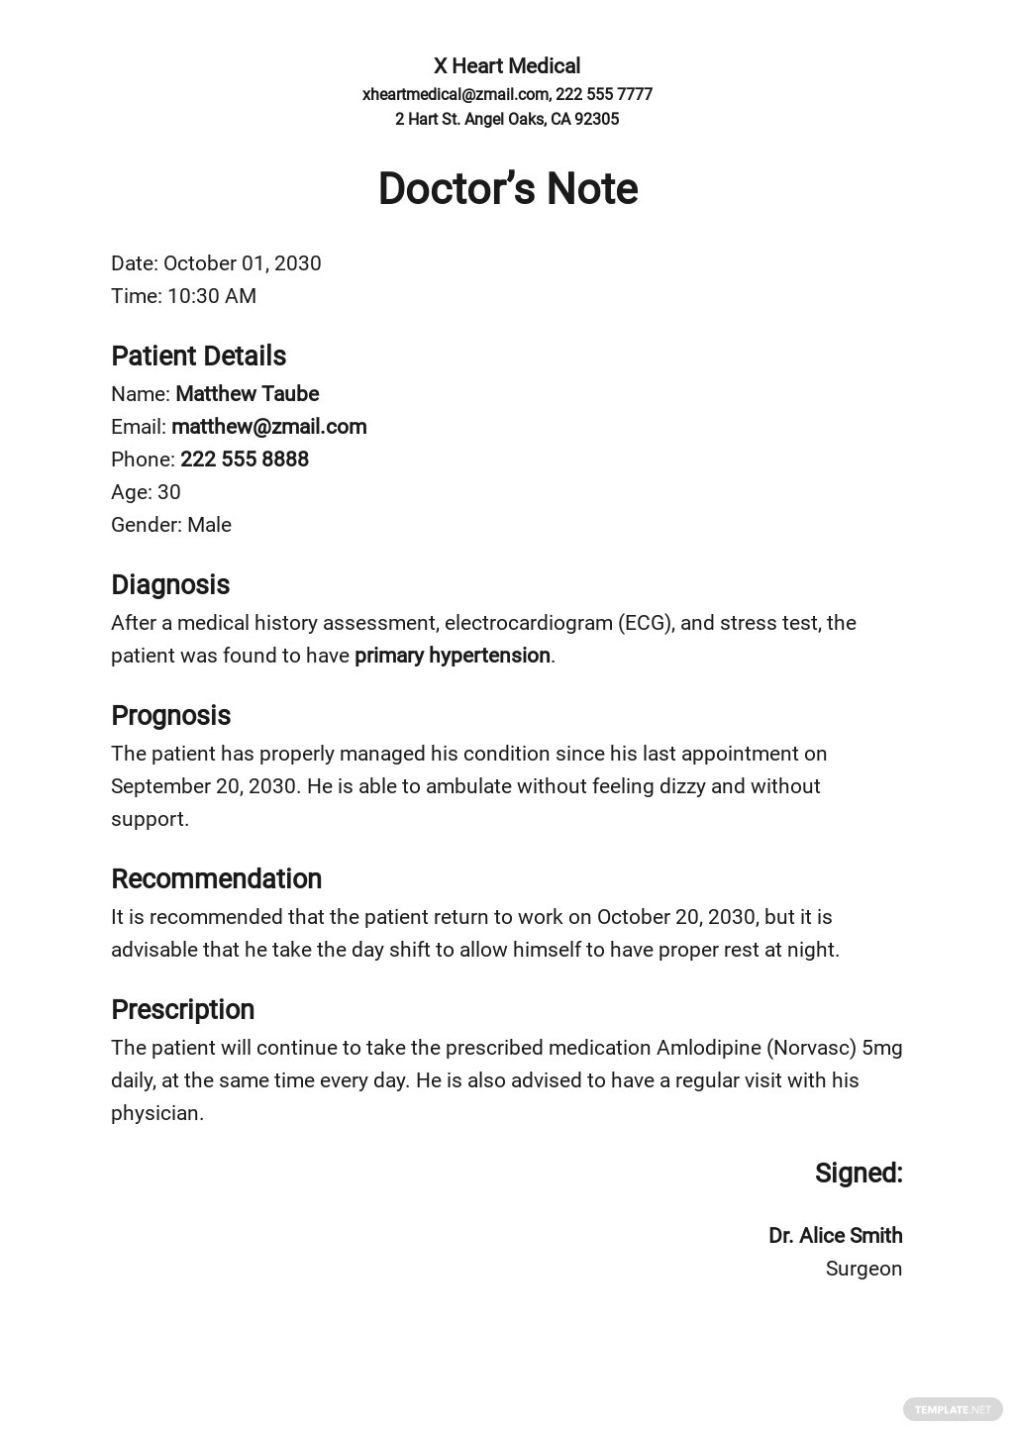 Doctors Note For Work Template [Free Pdf] - Word, Apple Pages, Pdf In Return To Work Note Template